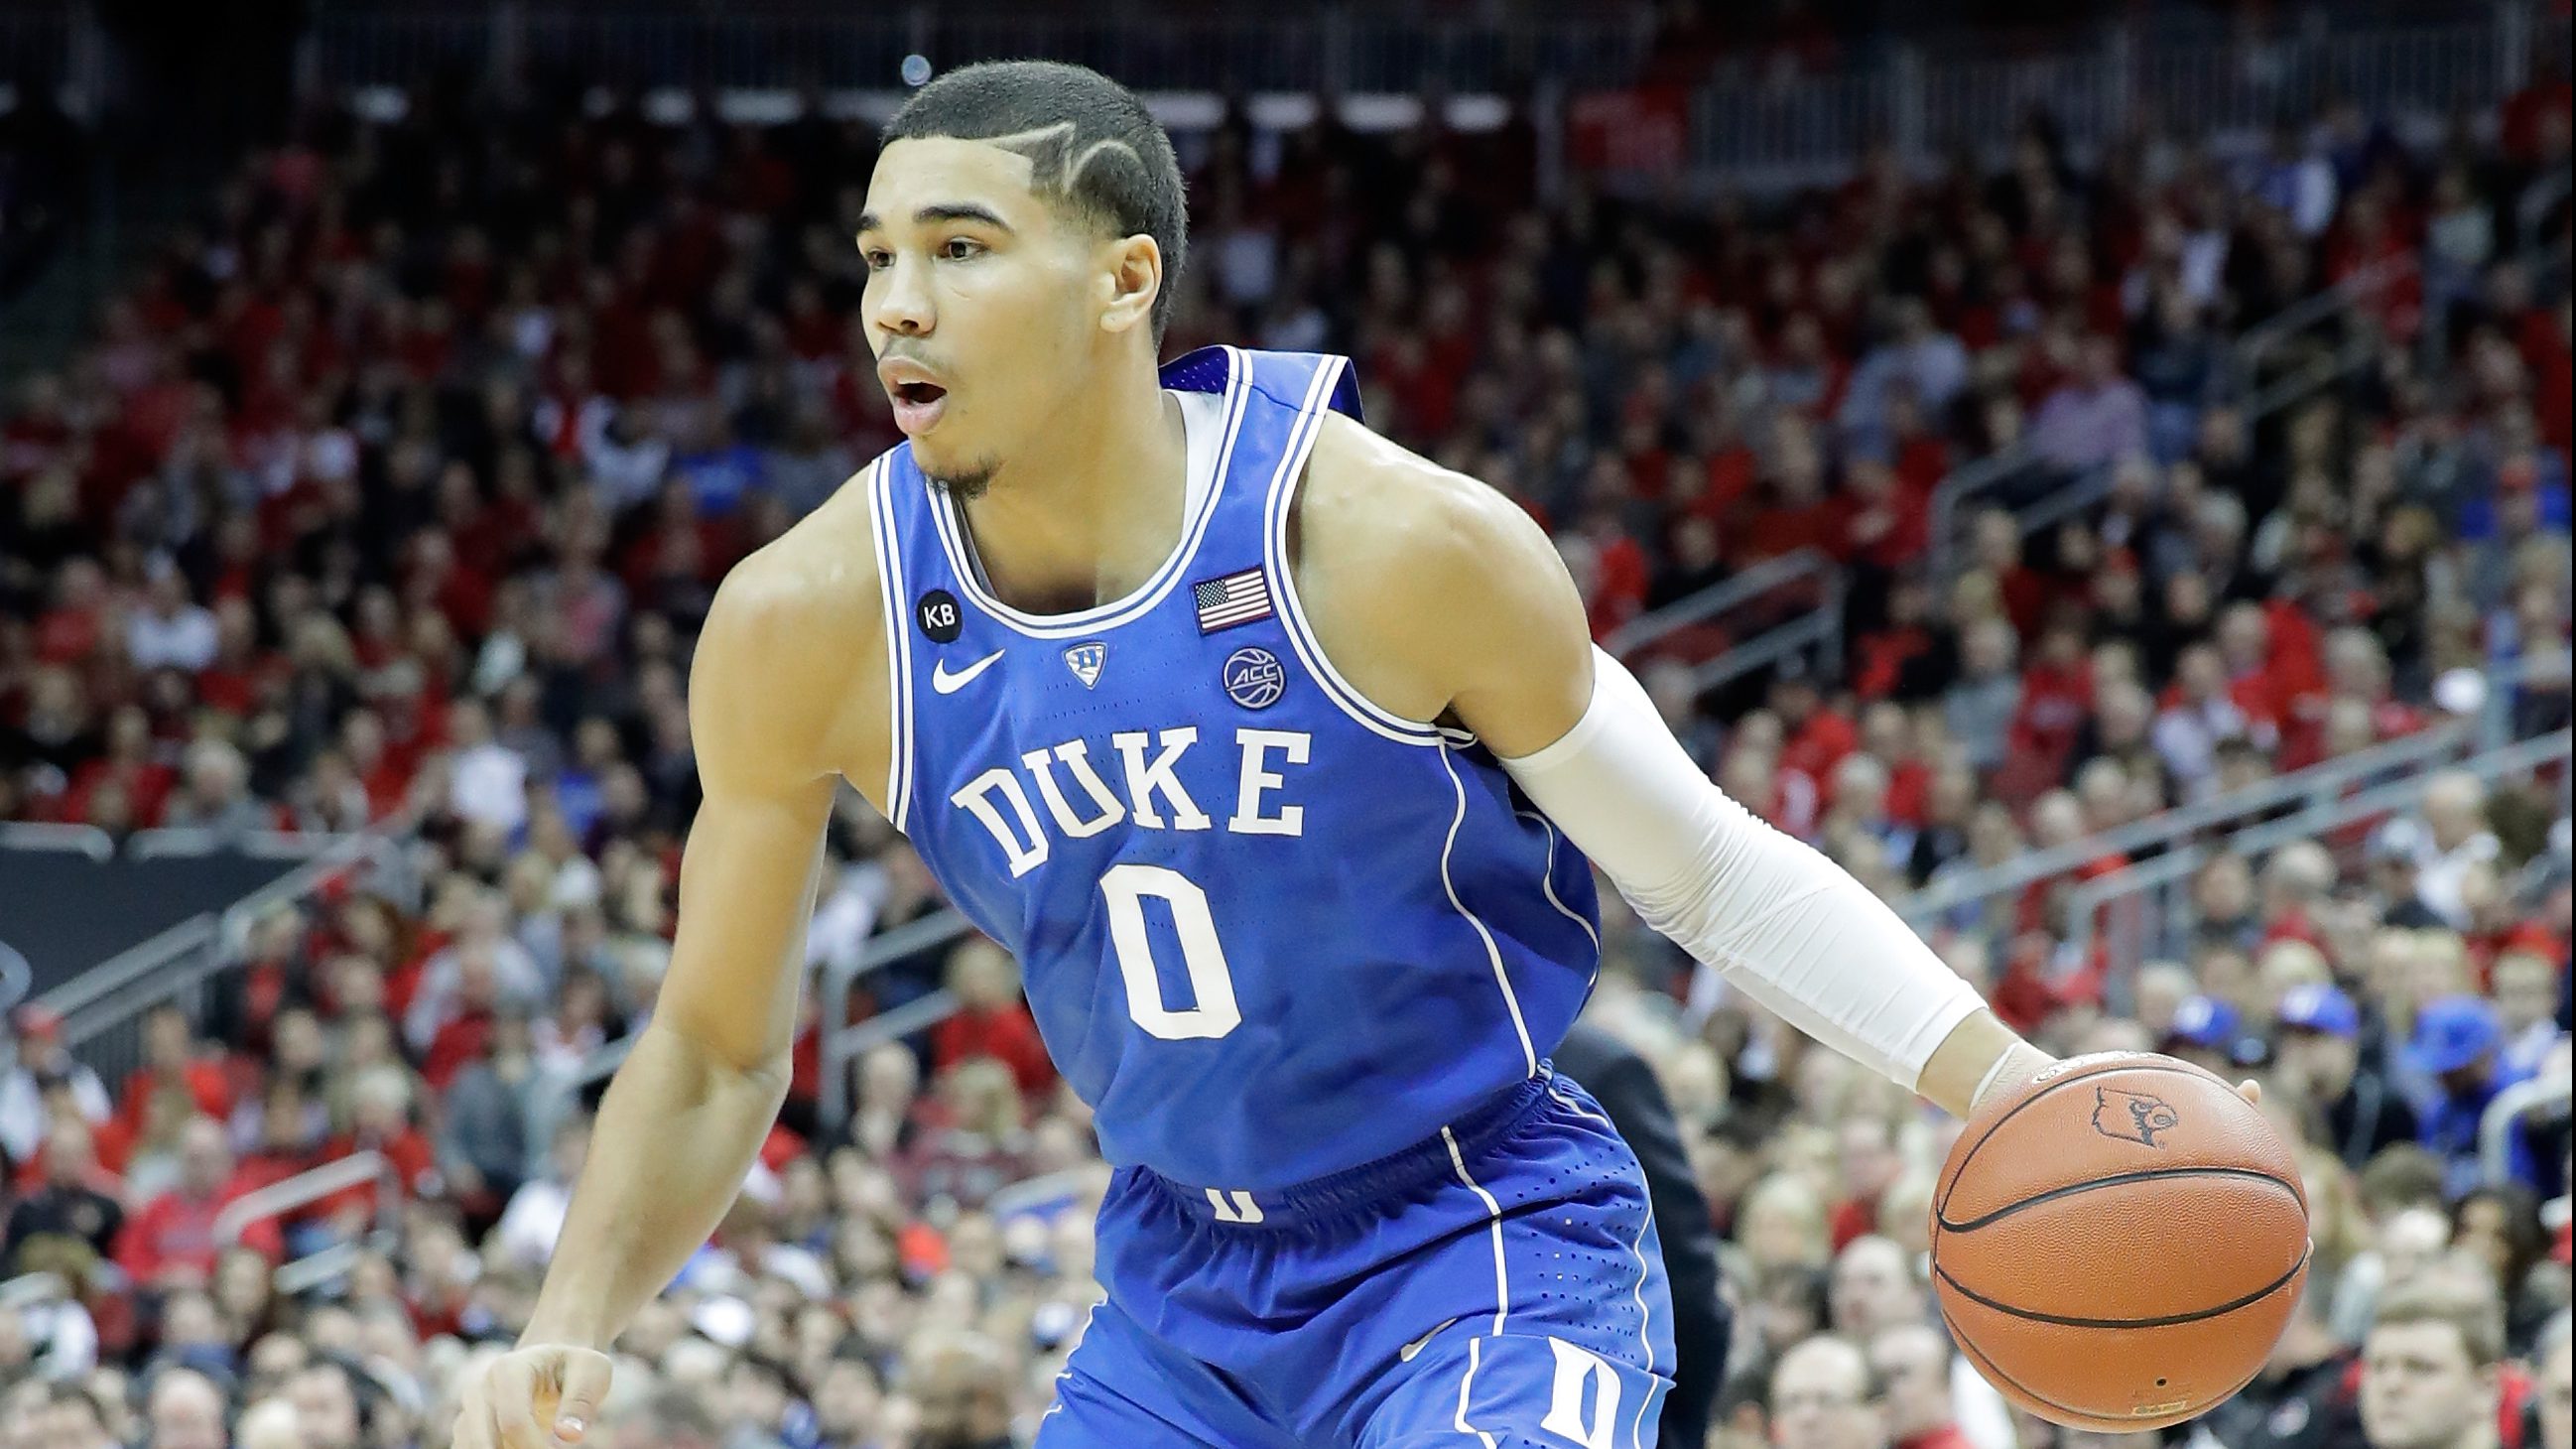 LOUISVILLE, KY - JANUARY 14: Jayson Tatum #0 of the Duke Blue Devils dribbles the ball during the game against the Louisville Cardinals at KFC YUM! Center on January 14, 2017 in Louisville, Kentucky. (Photo by Andy Lyons/Getty Images)